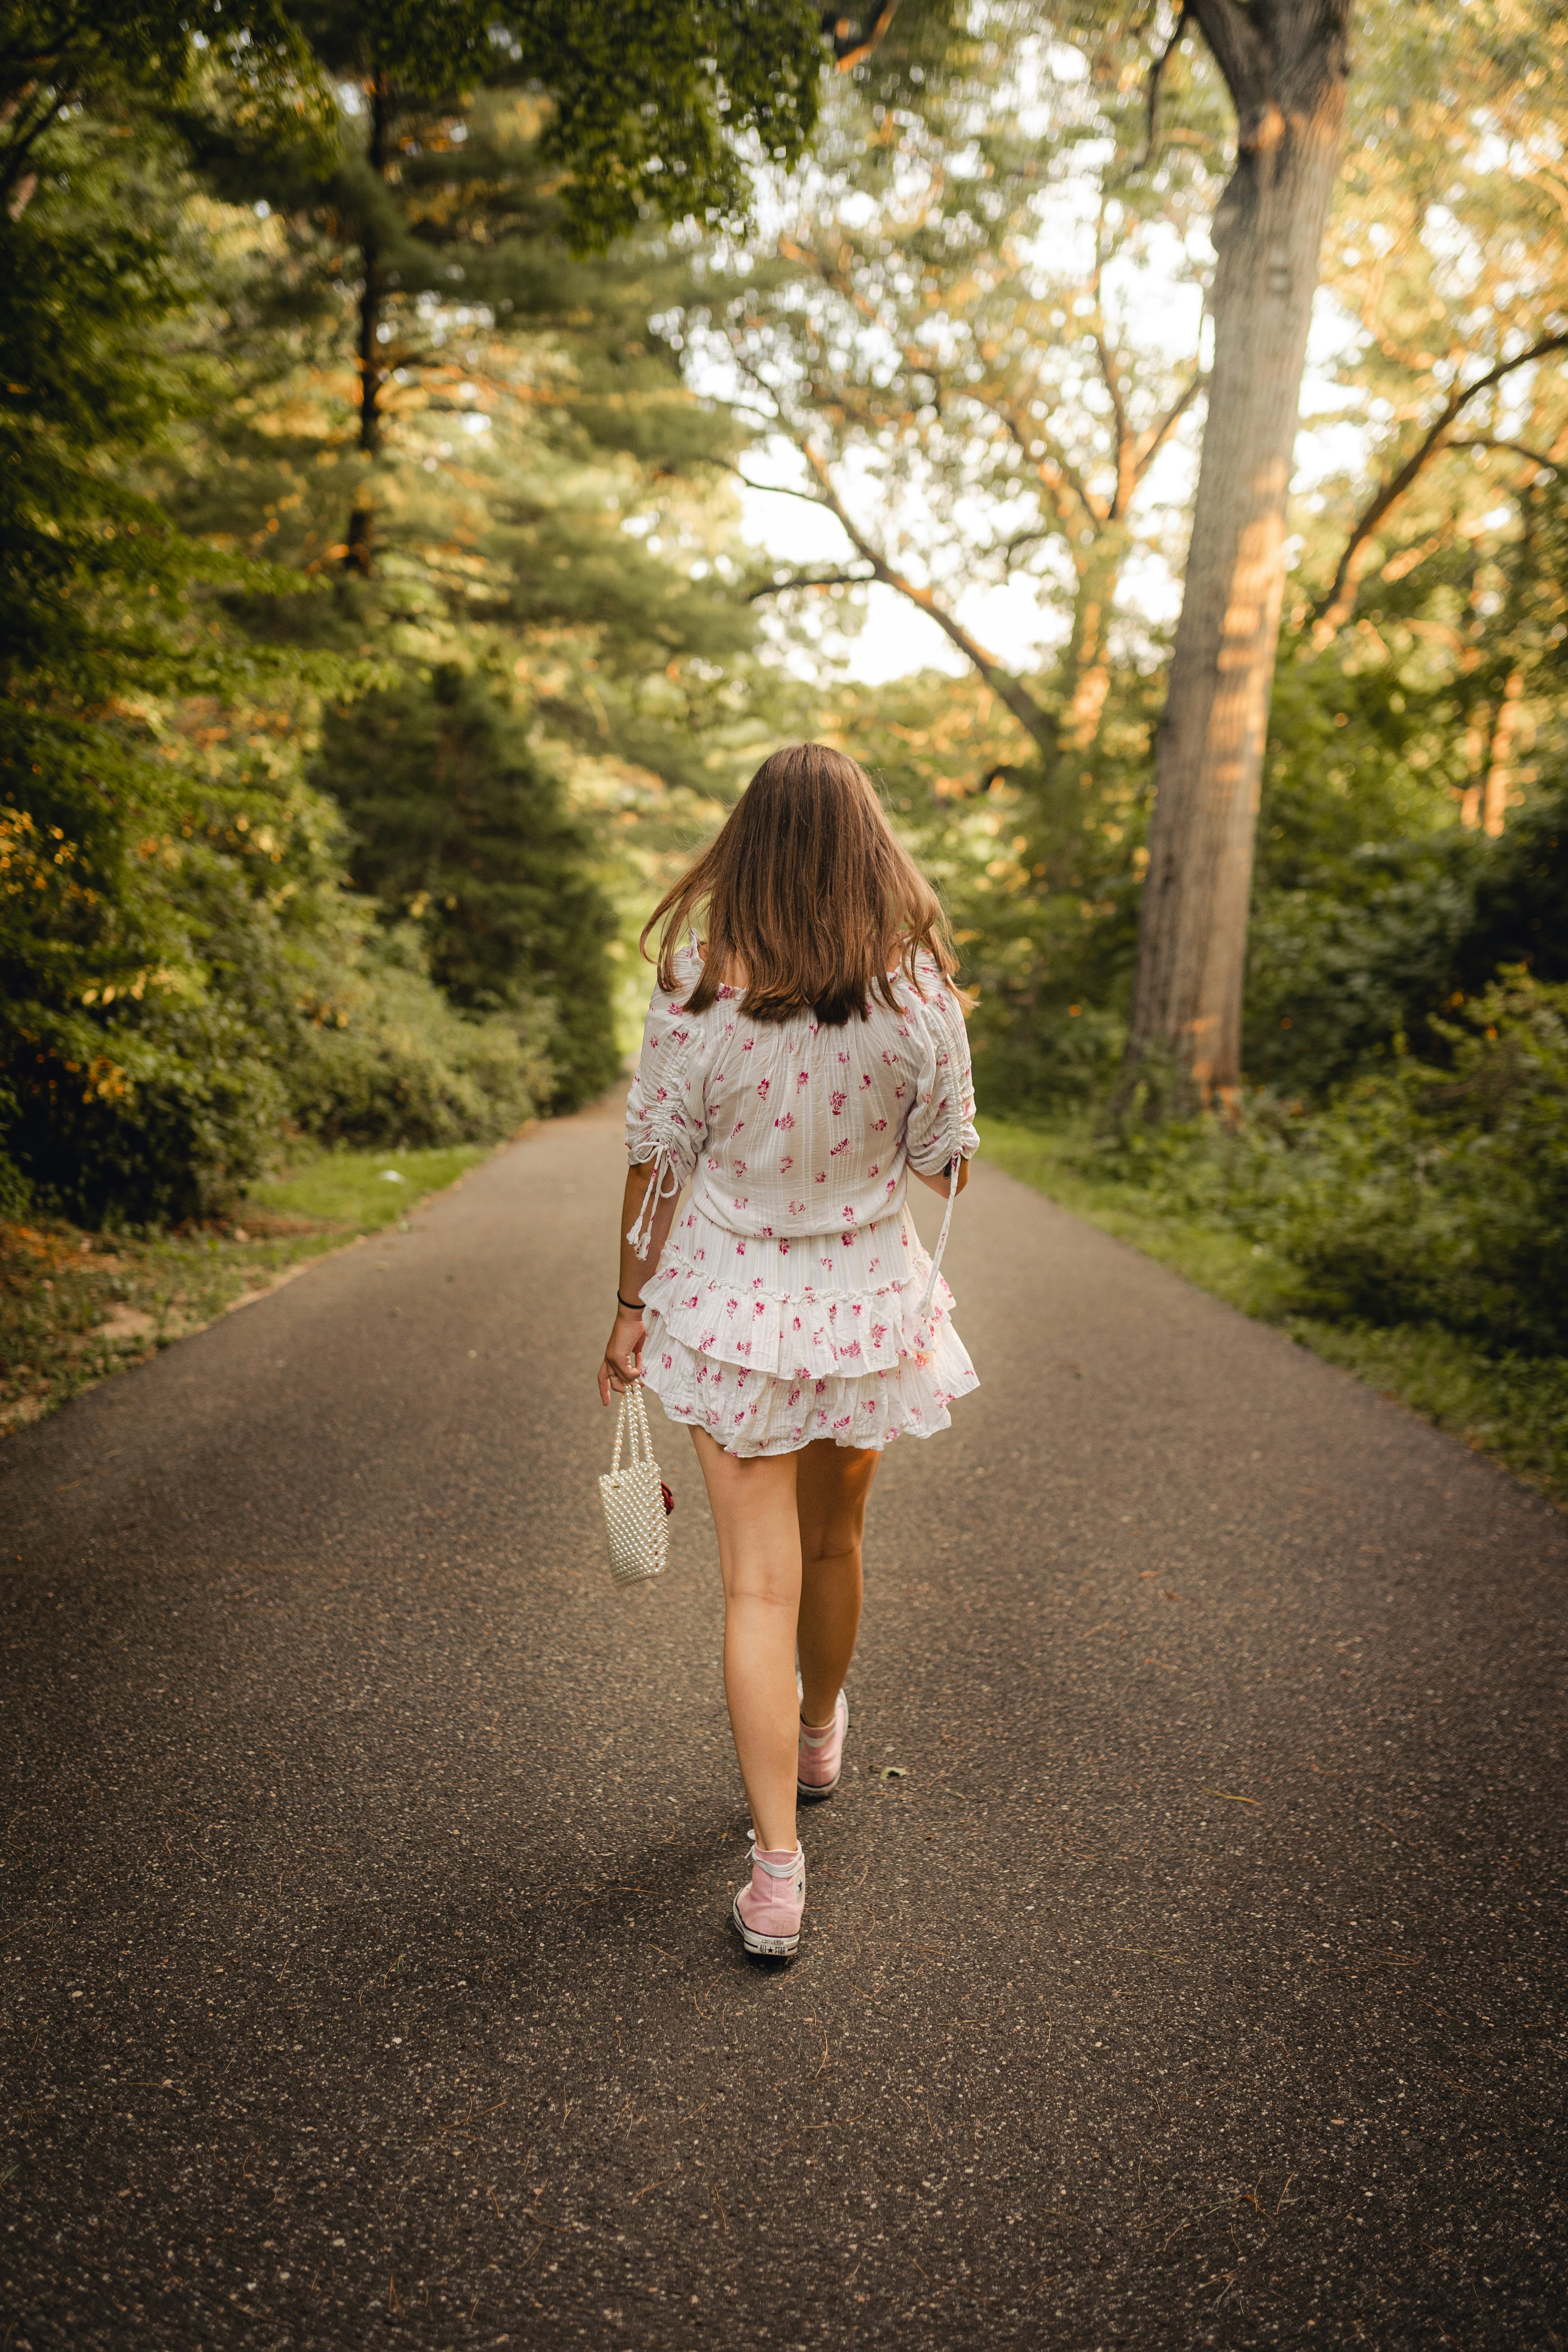 girl in white and pink floral dress walking on gray asphalt road during daytime